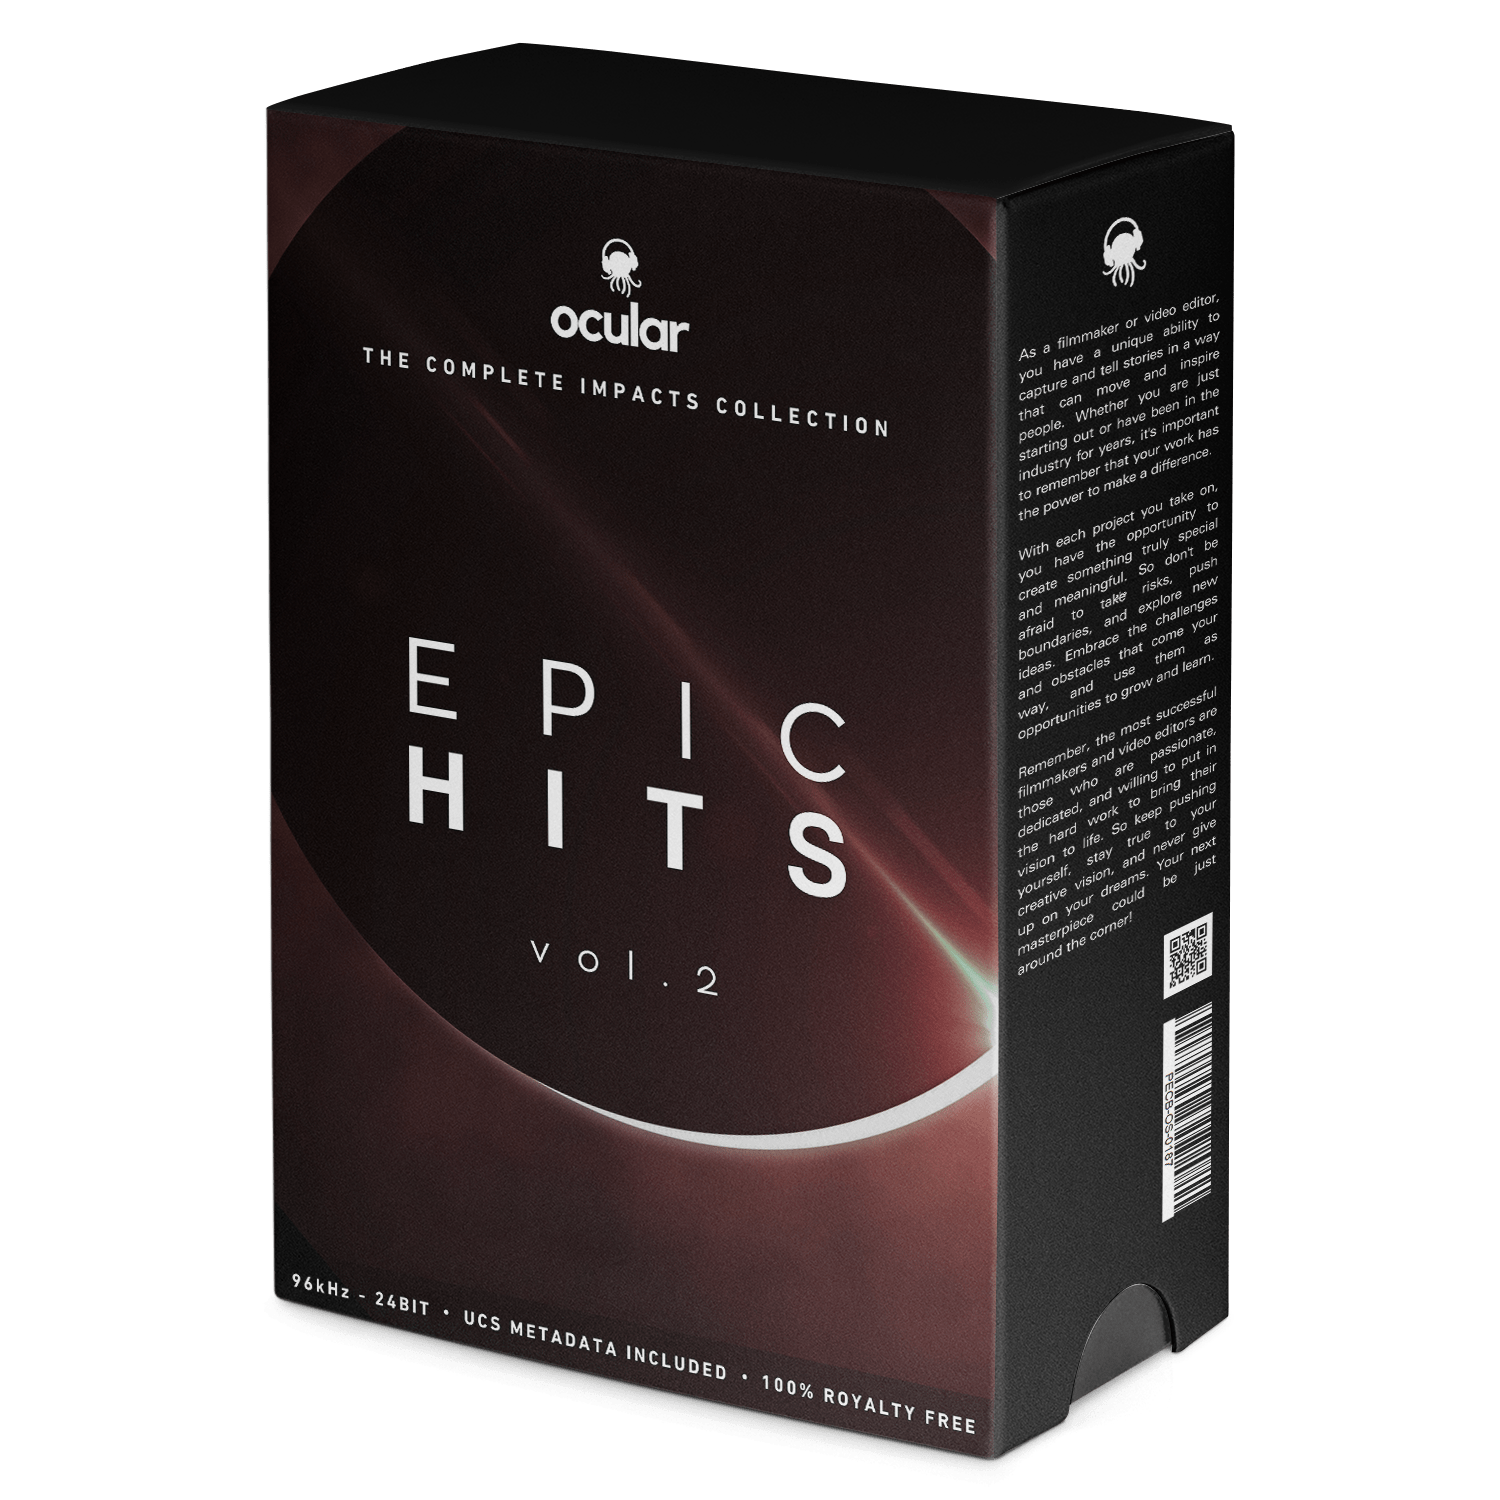 Epic Hits Sound FX for video editing.